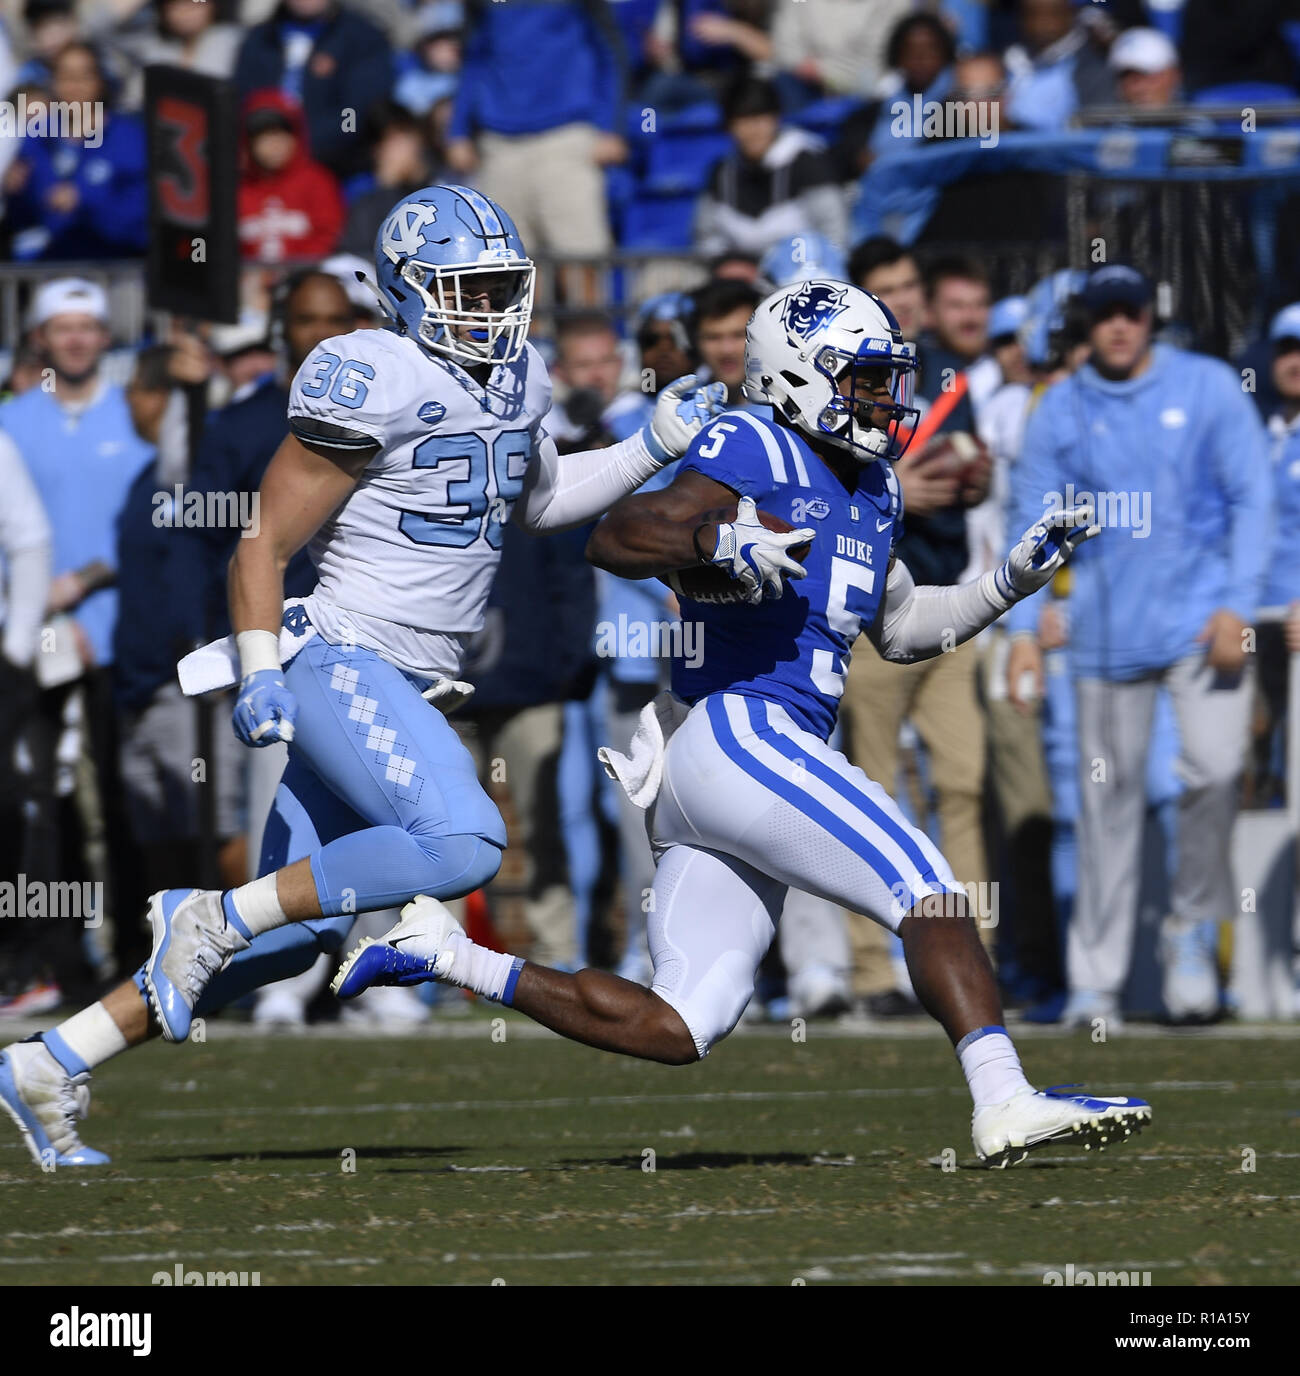 Durham, North Carolina, USA. 10th Nov, 2018. JOHNATHAN LLOYD (5) of Duke carries the ball against COLE HOLCOMB (36) of UNC. The Duke Blue Devils played the North Carolina Tar Heels in a football game that took place on the Brooks Field at Wallace Wade Stadium in Durham, N.C. on Saturday, November 10, 2018. Credit: Fabian Radulescu/ZUMA Wire/Alamy Live News Stock Photo